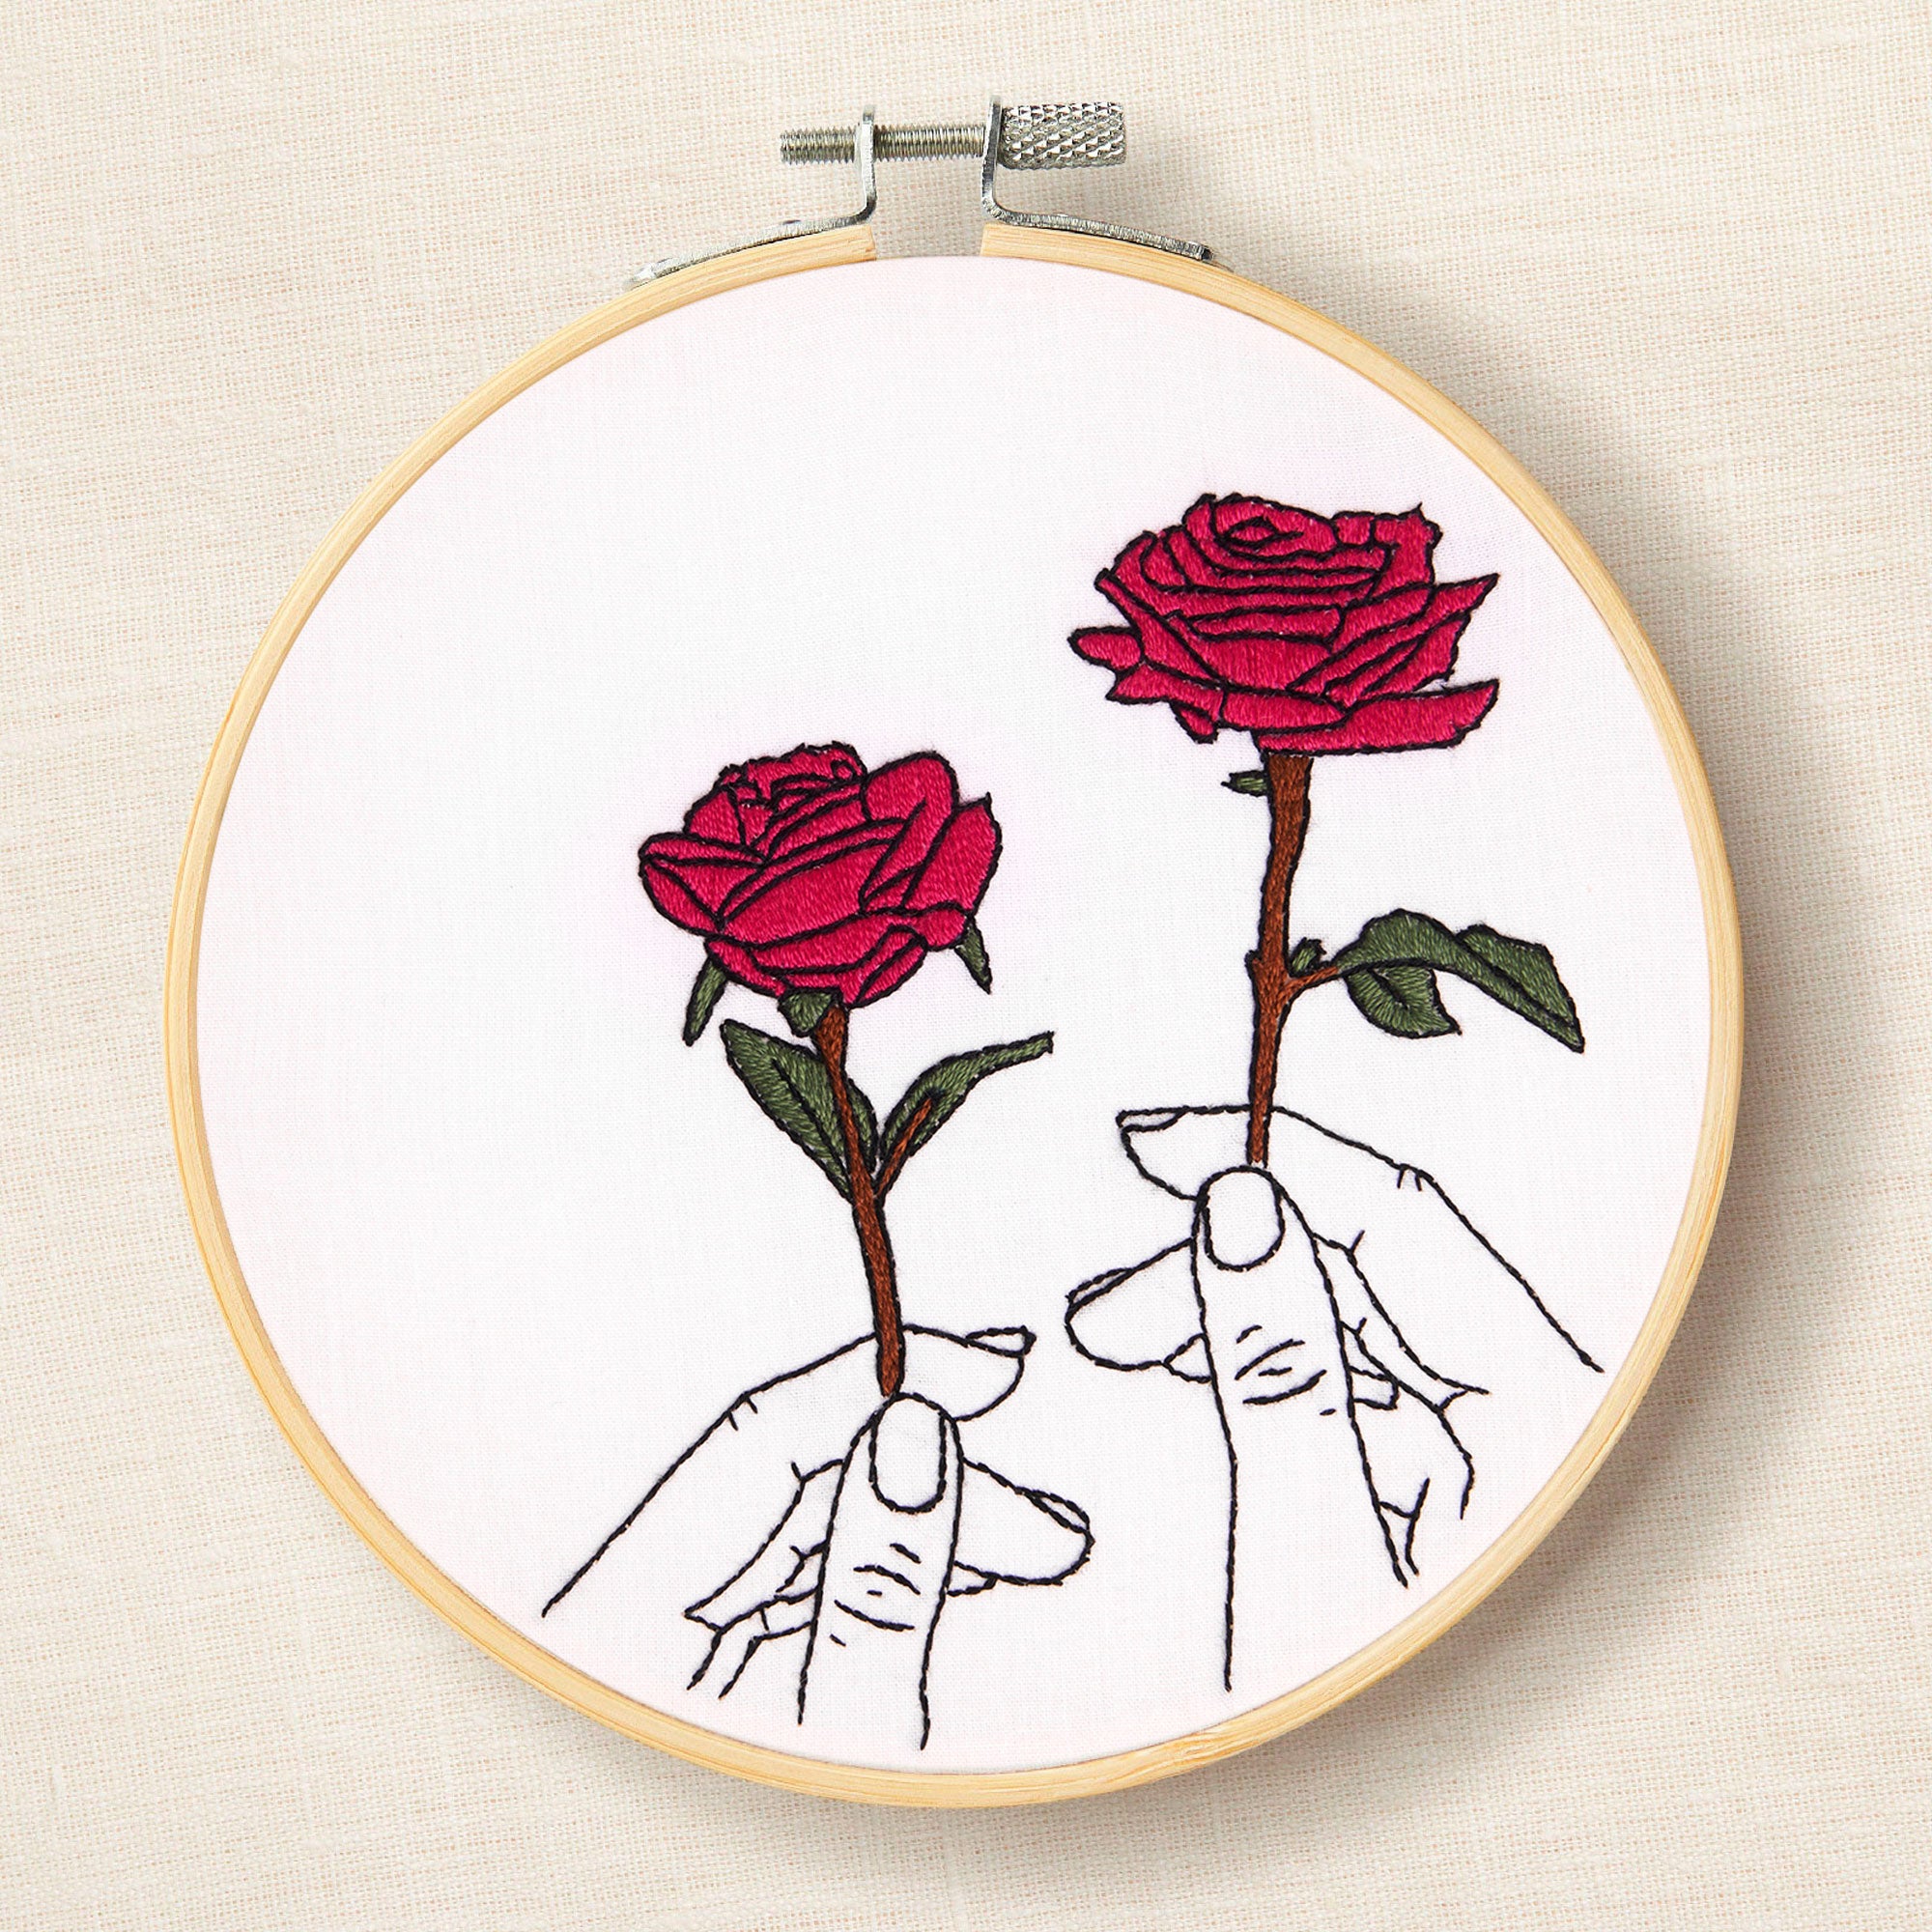 DMC Rose in Hands by Jenni Davis (Embroidery Kit)